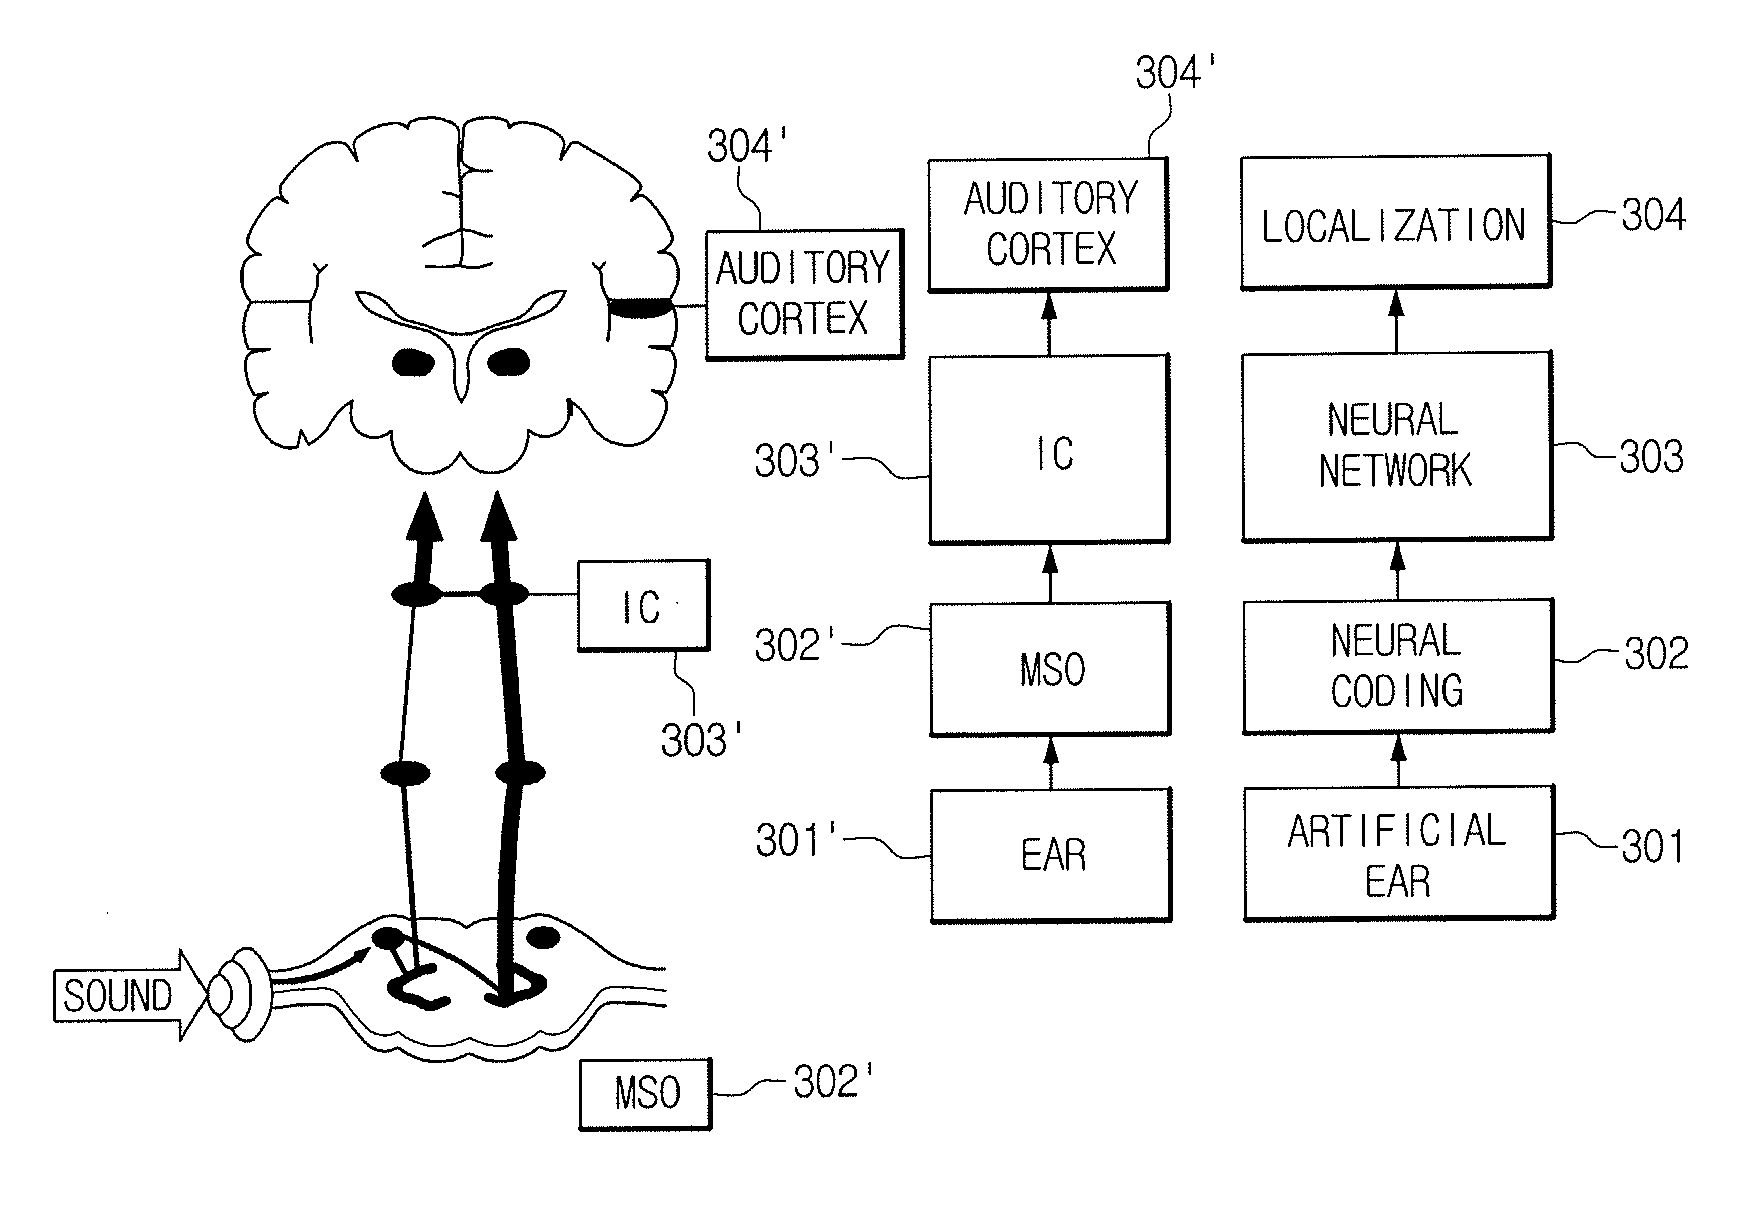 Sound source localization system and method